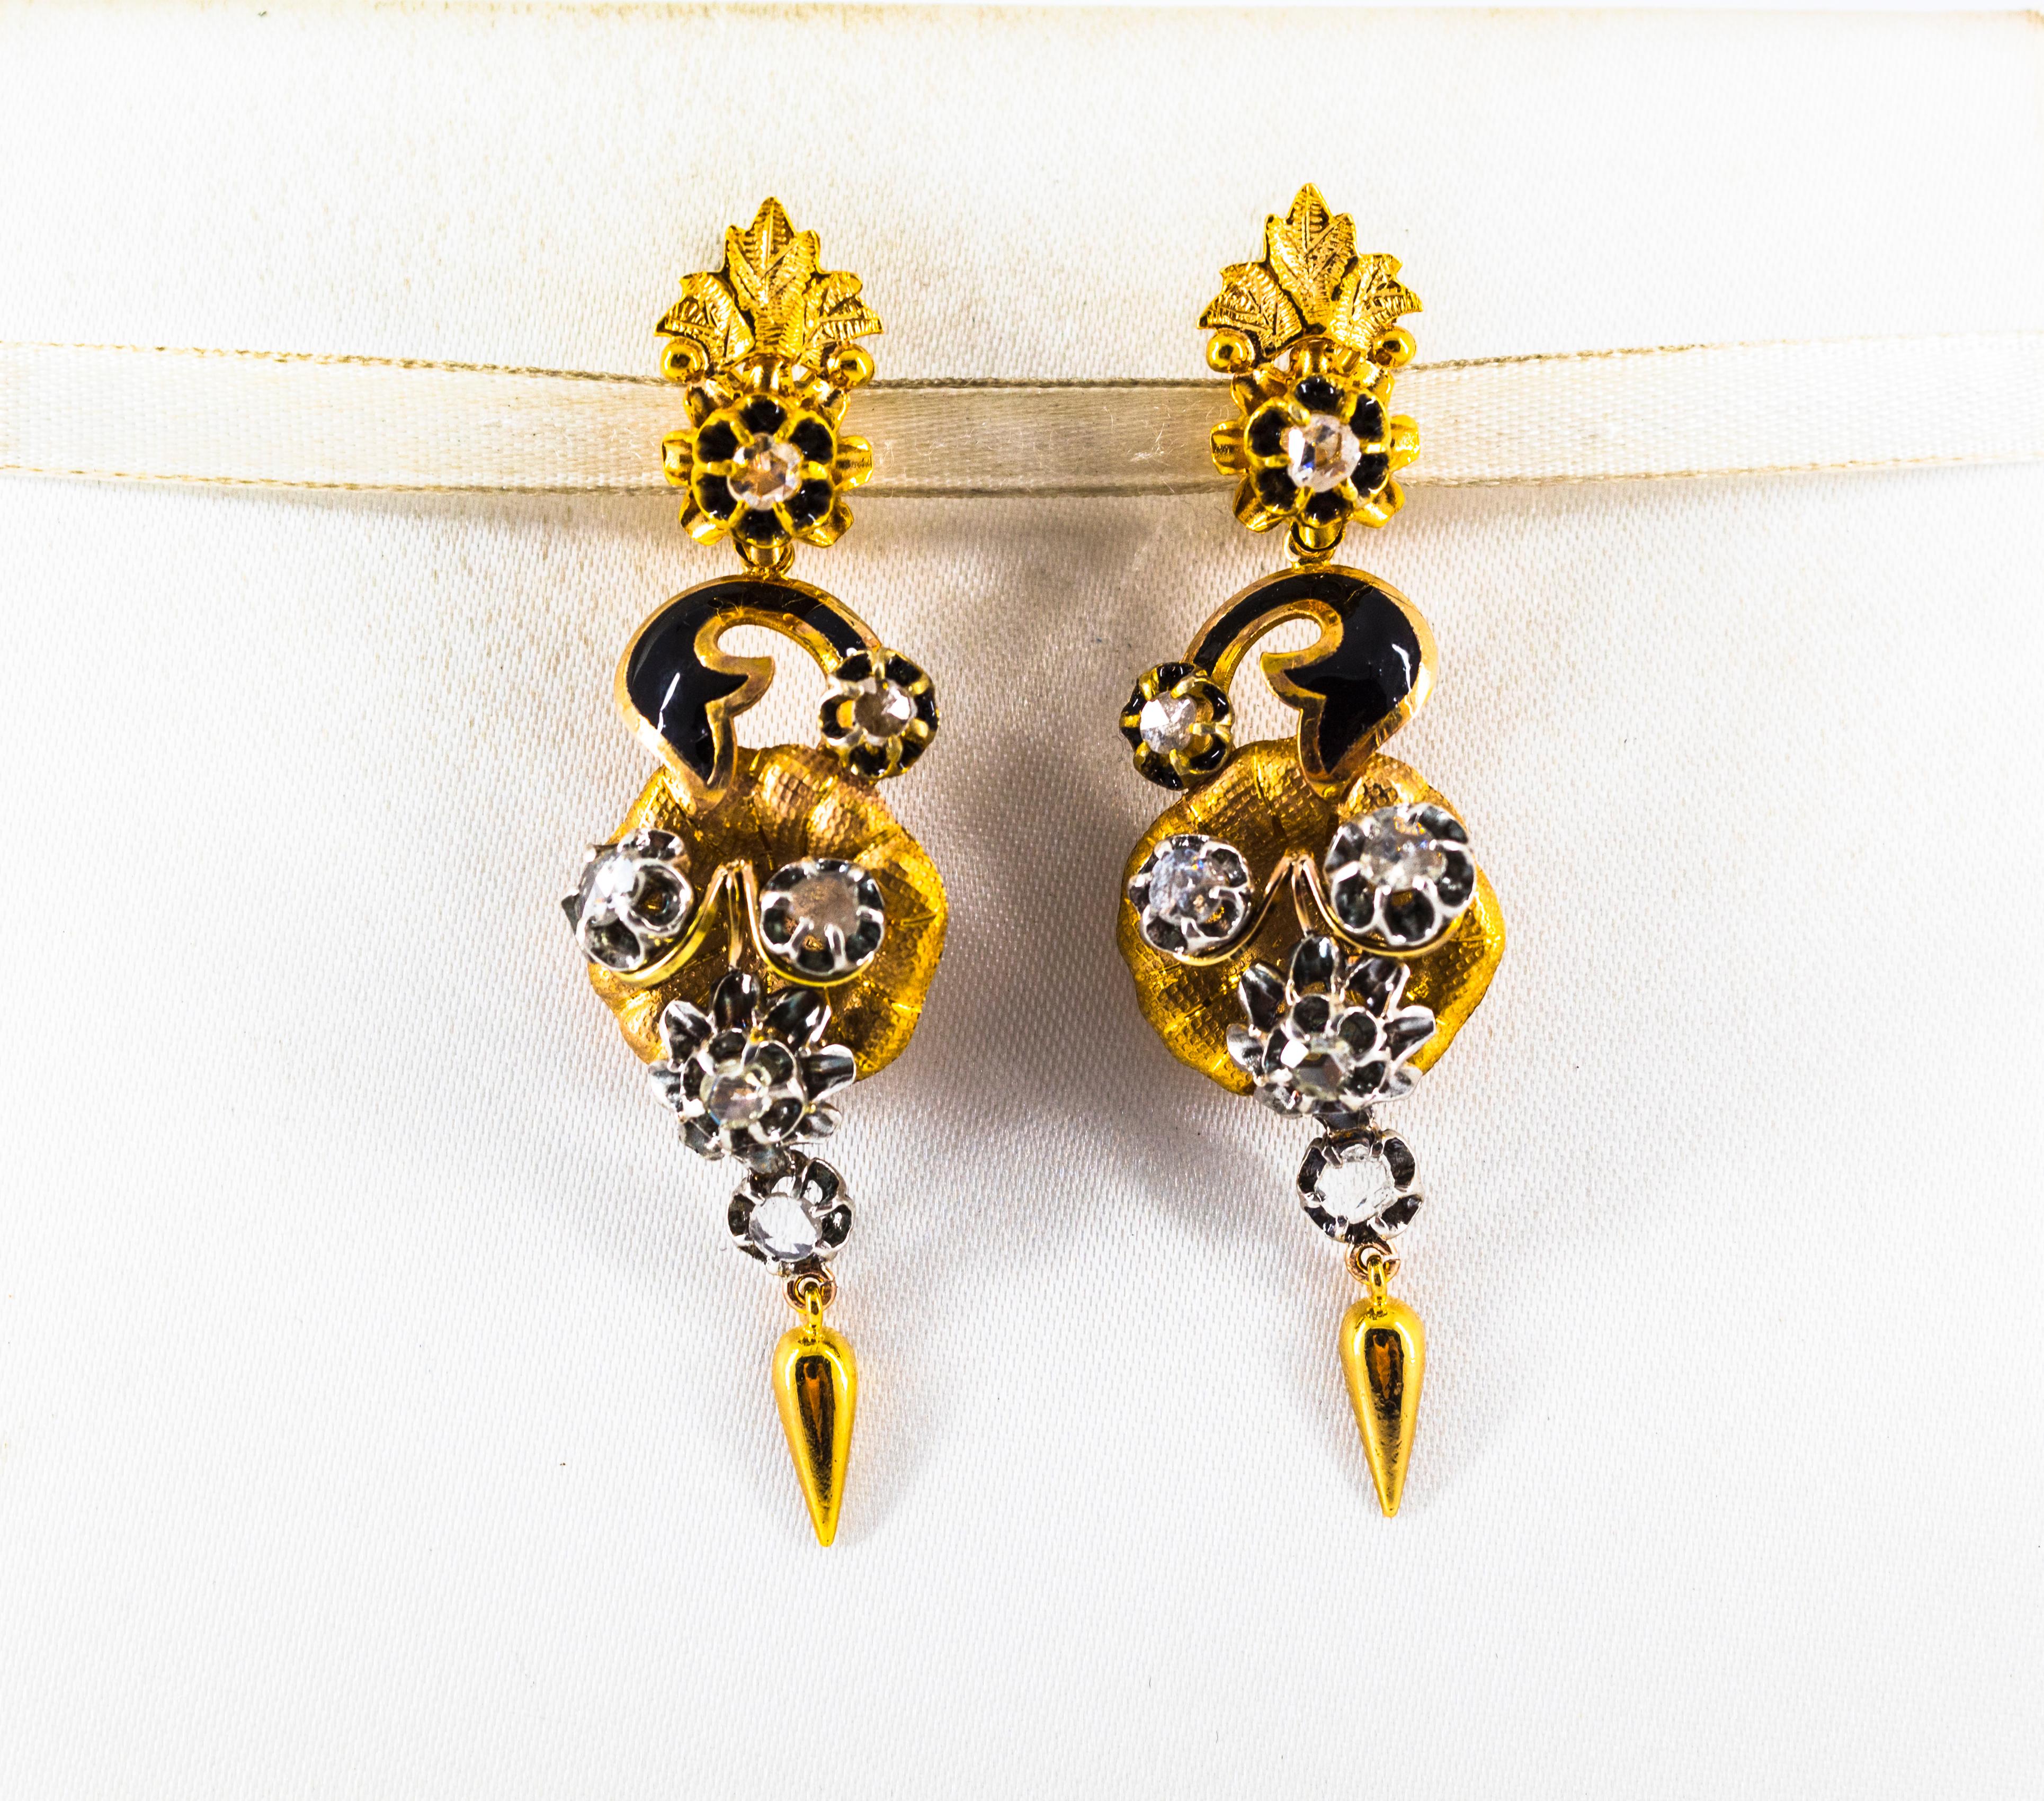 These Earrings are made of 9K Yellow Gold and Sterling Silver.
These Earrings have 1.40 Carats of White Rose Cut Diamonds.
These Earrings have also Black Enamel.

All our Earrings have pins for pierced ears but we can change the closure and make any